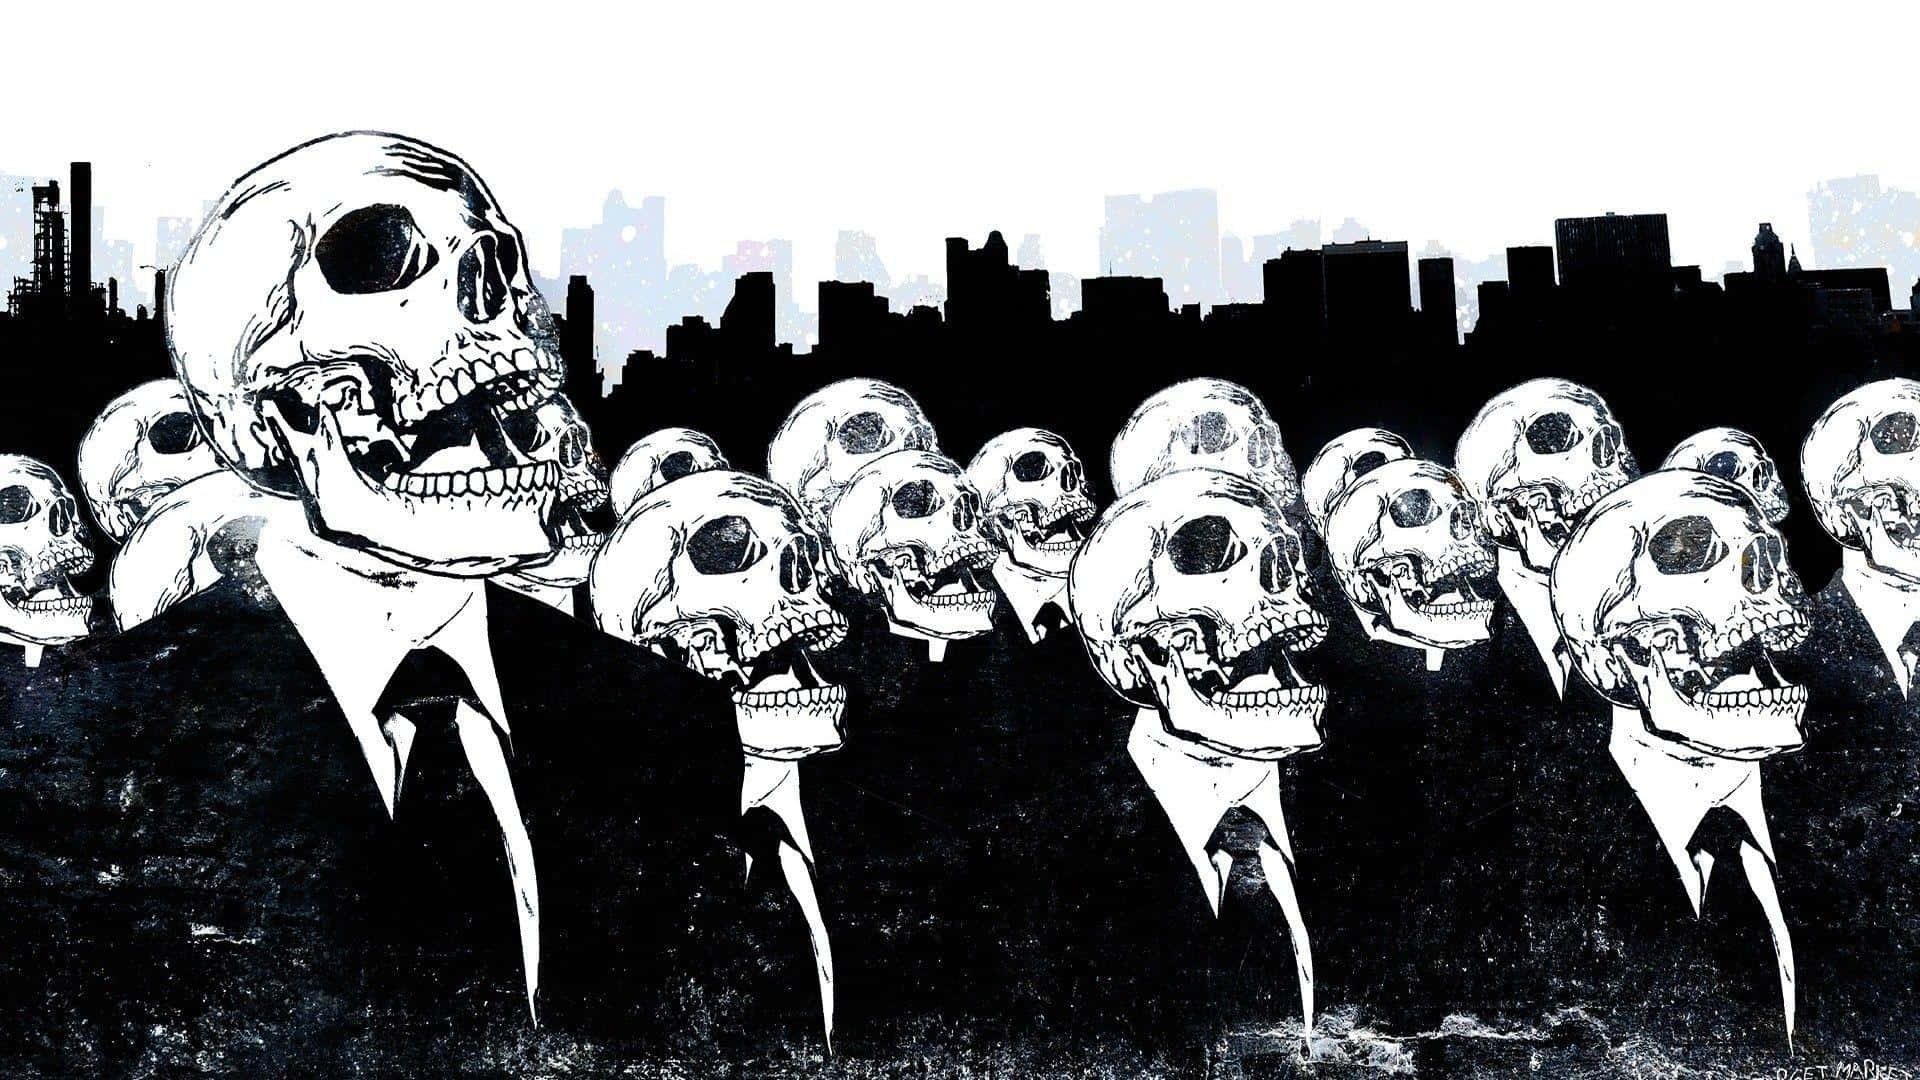 A Group Of Skulls In Suits And Ties